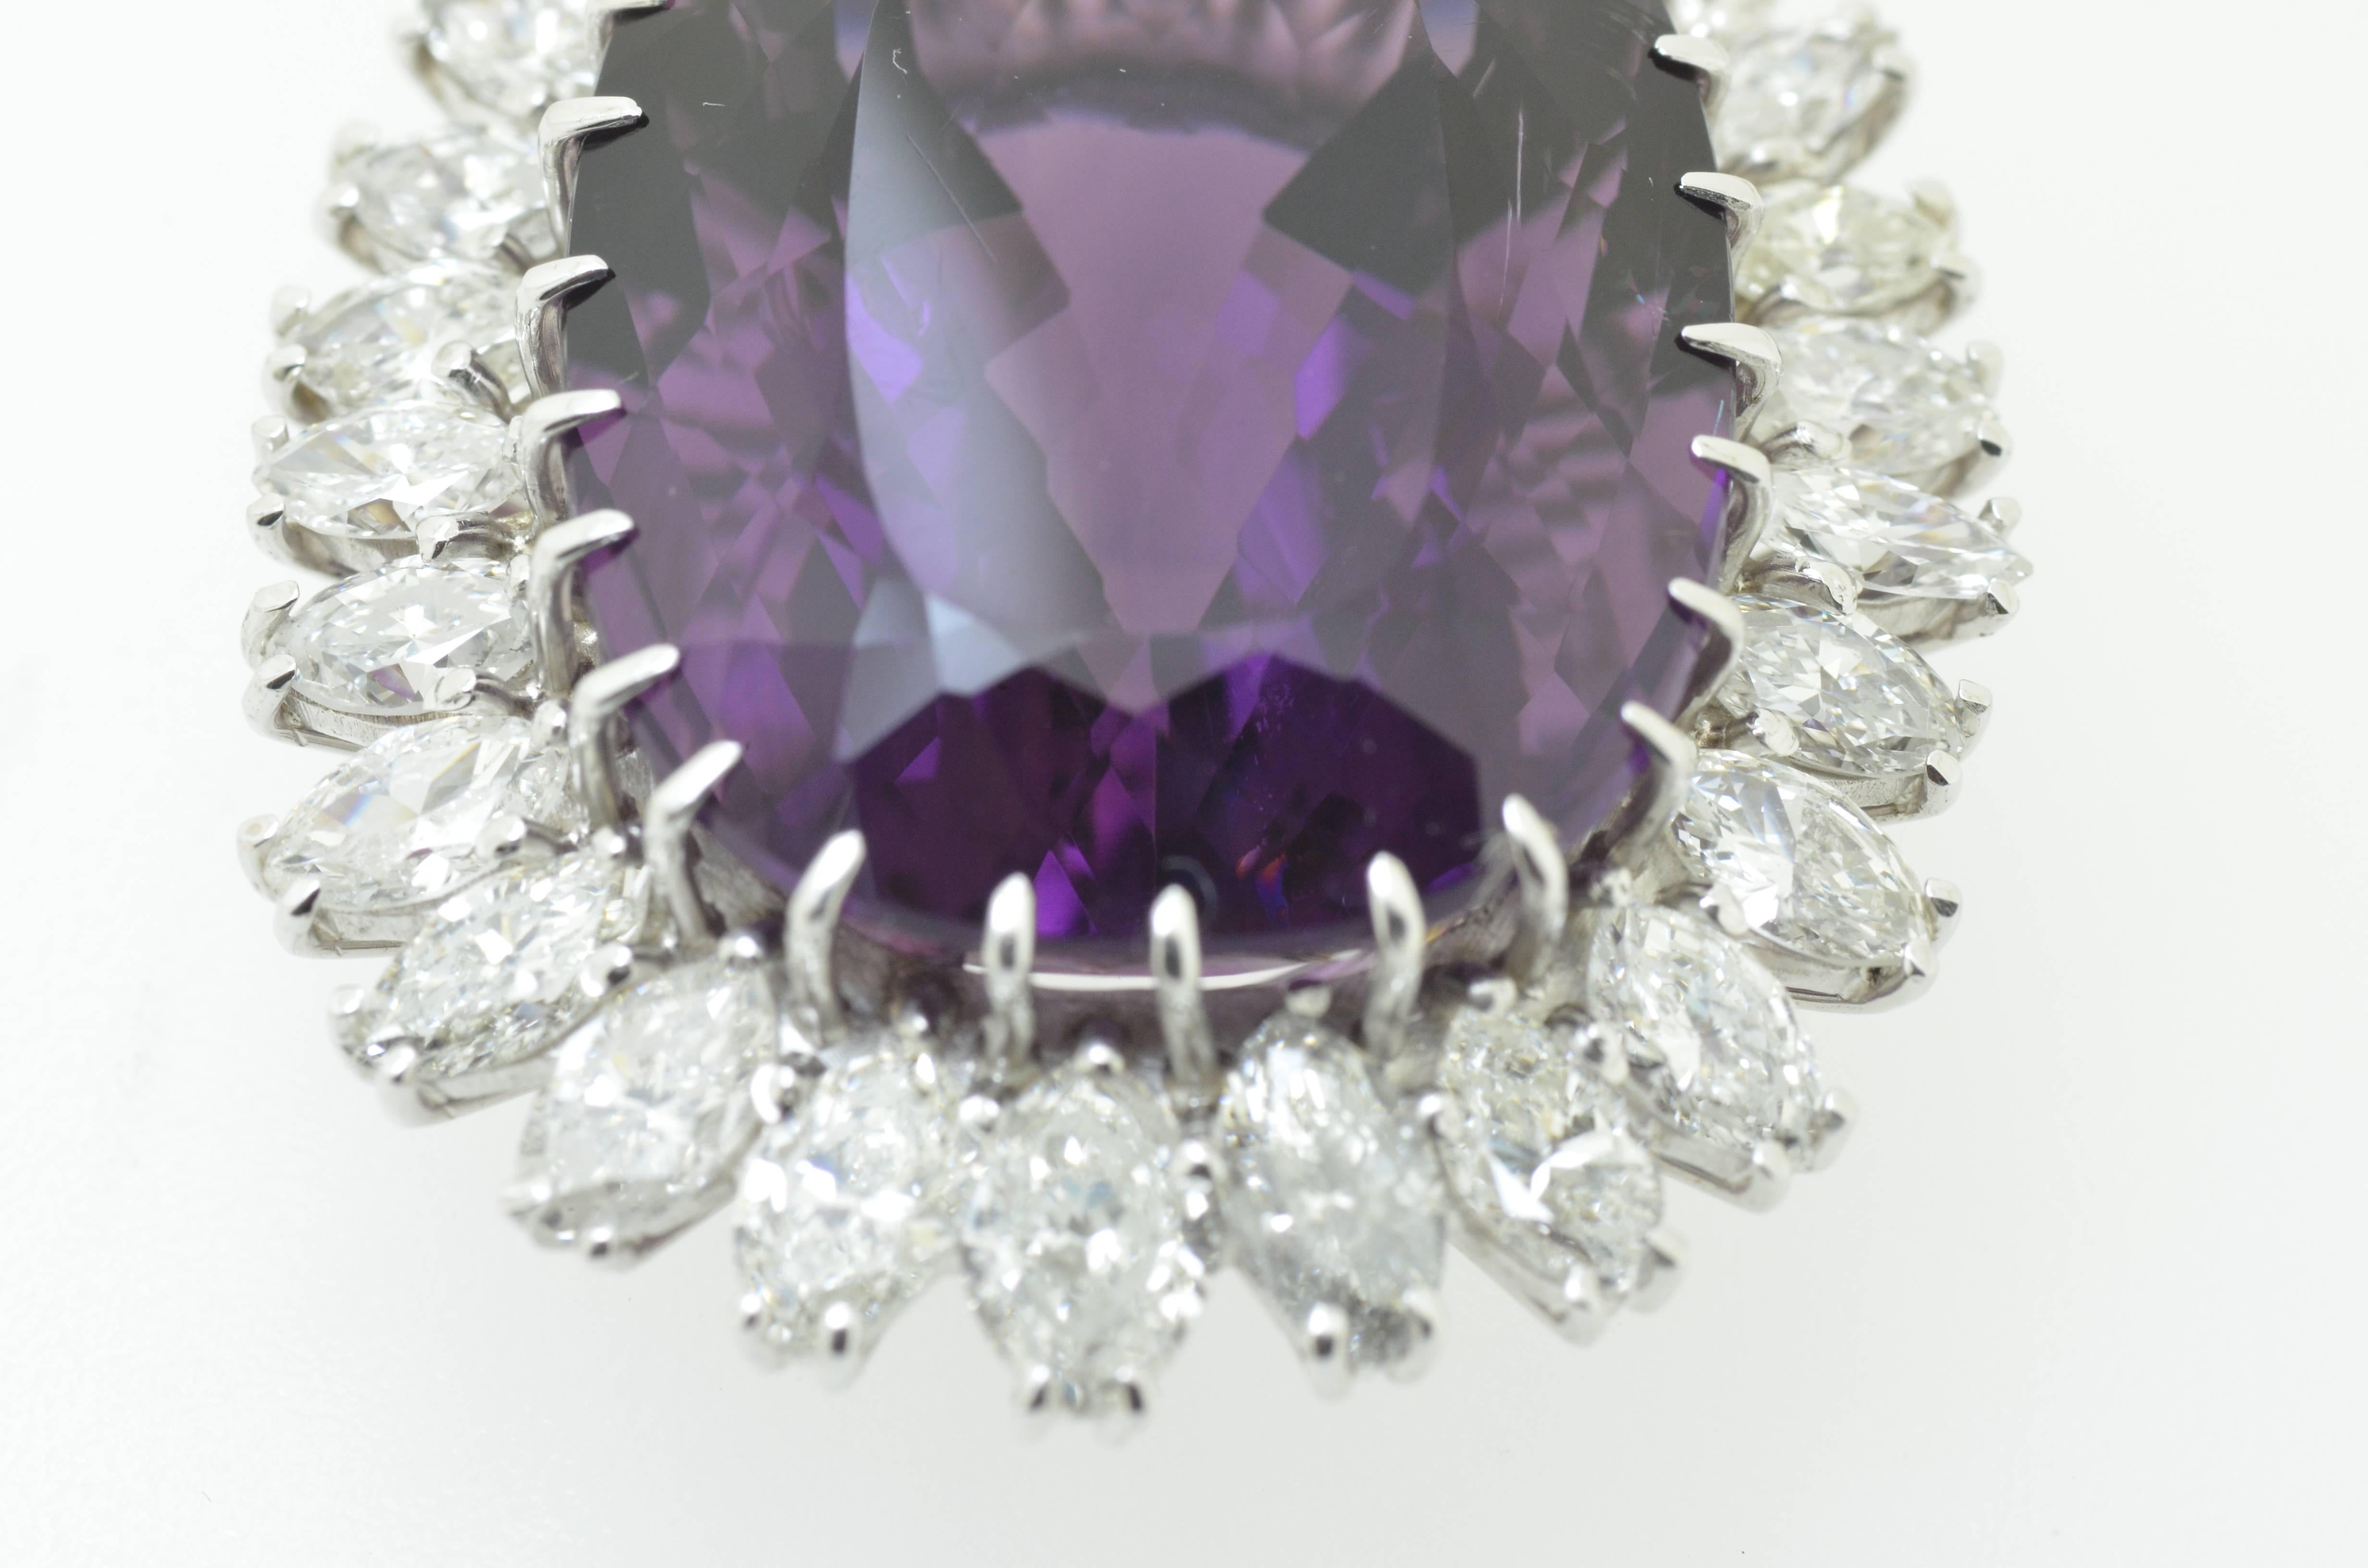 Beautiful pendant featuring a rich violet  russian amethyst approximately 45 carats in total set with 29 graduating clean white marquise diamonds totaling approximately 5.8 carats in 18K white gold.

Makers mark: M.J